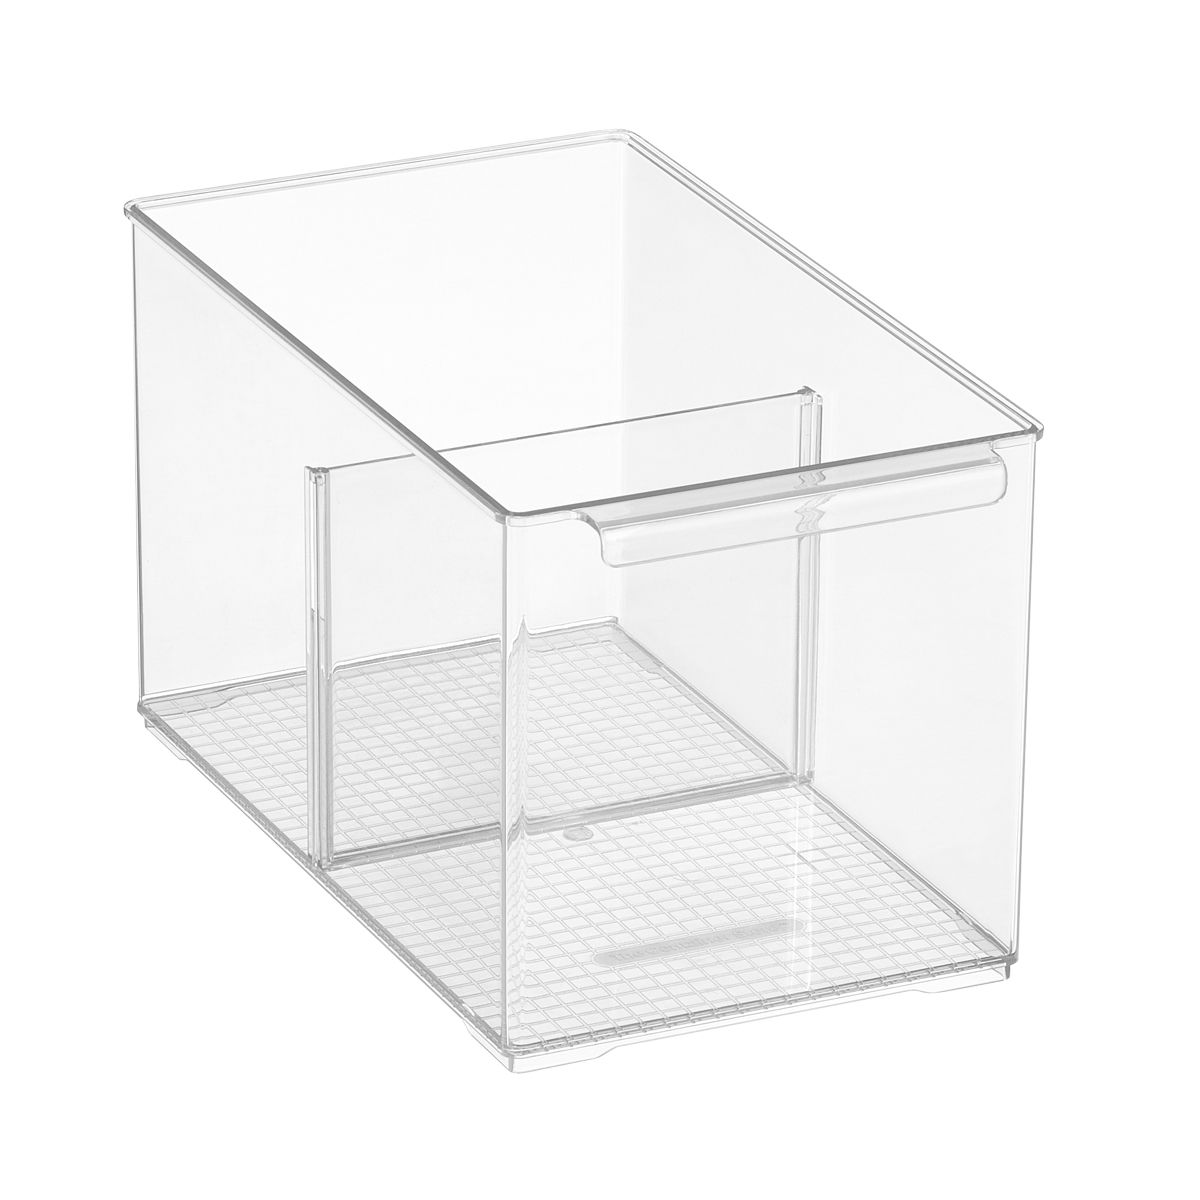 Everything Organizer Medium Cabinet Depth Pantry Bin w/ Divider | The Container Store